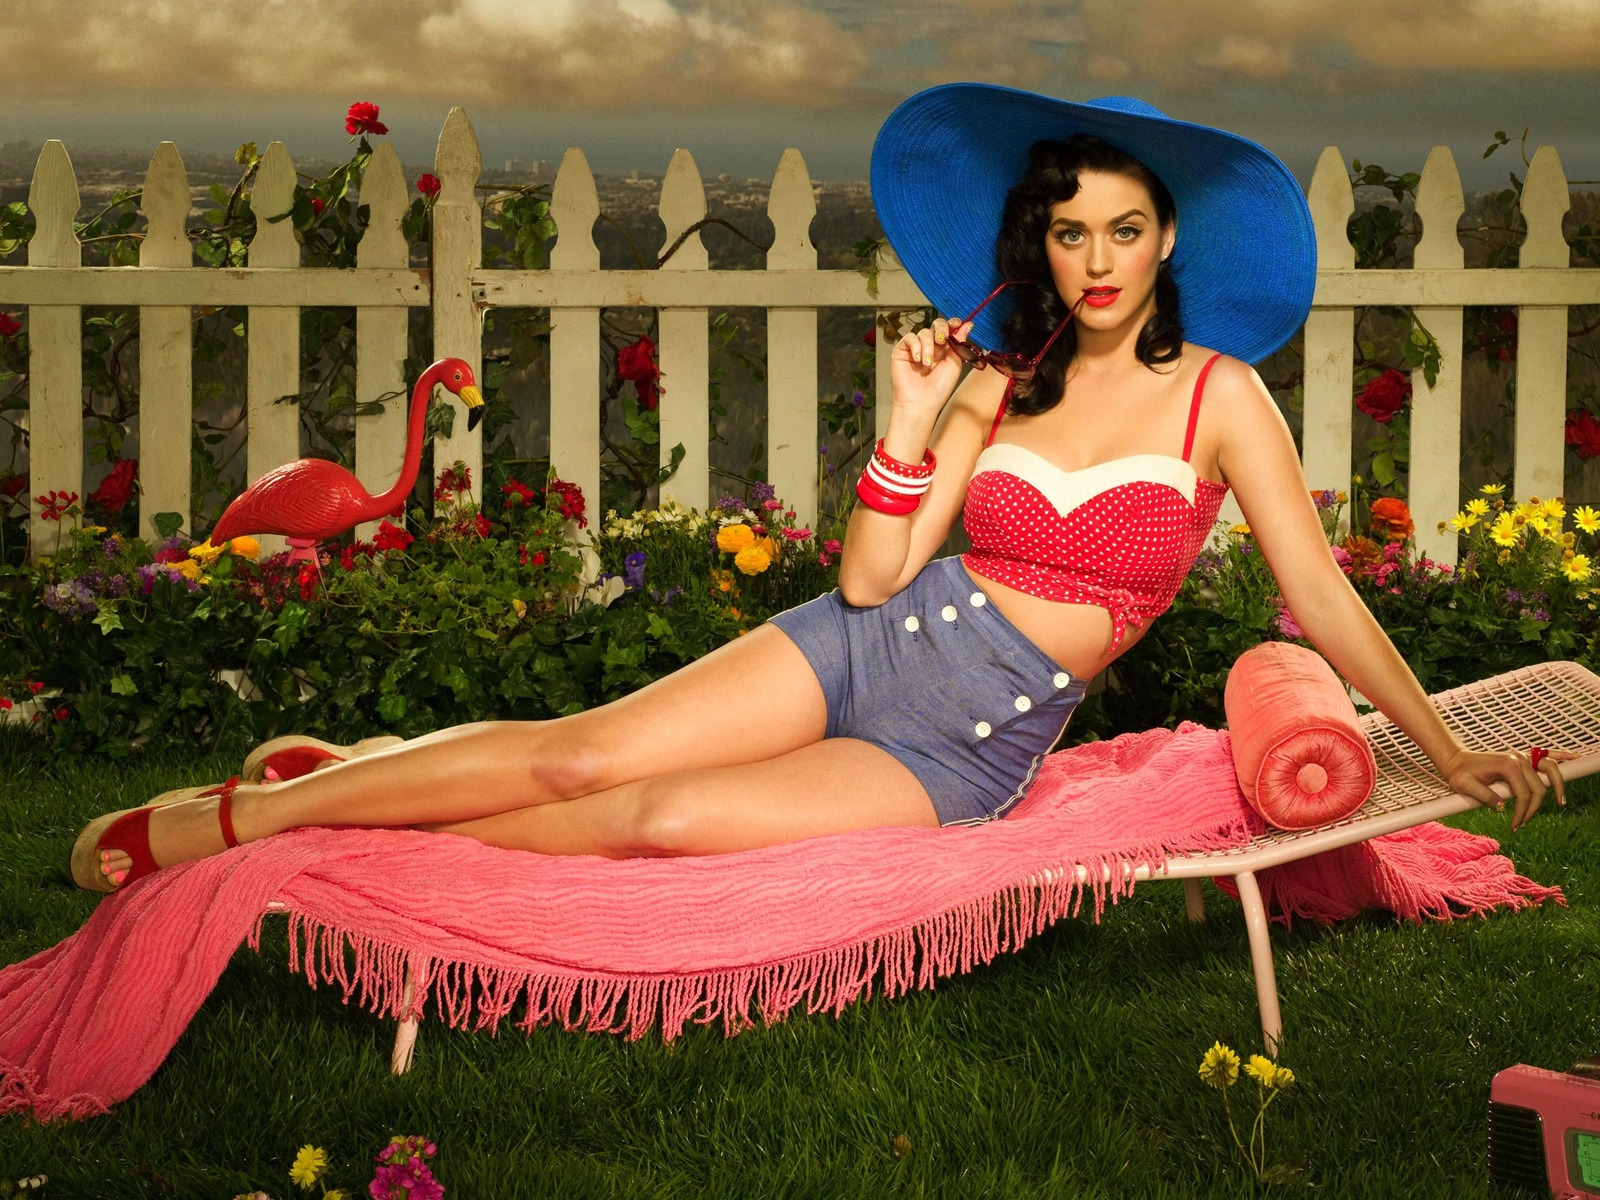 Katy Perry on The Chair for 1600 x 1200 resolution